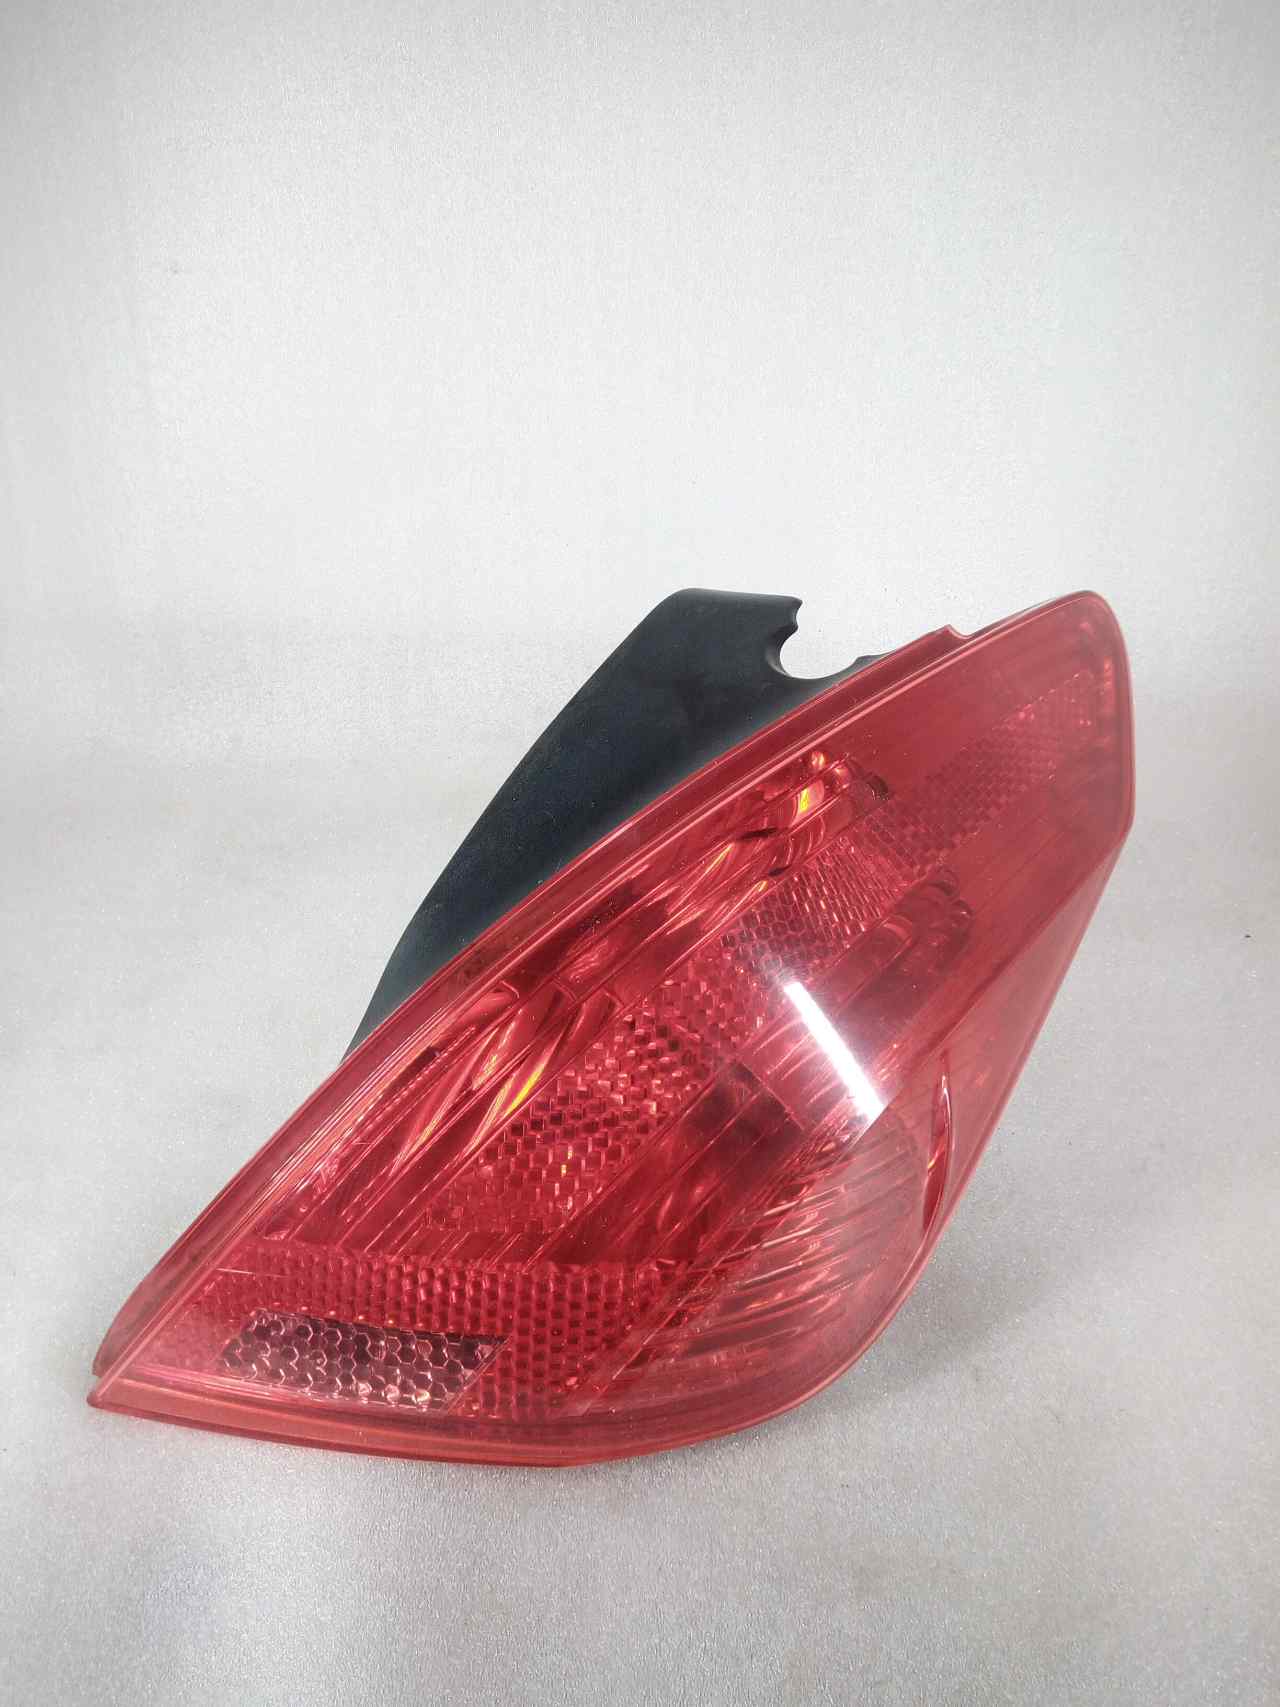 PEUGEOT 308 T7 (2007-2015) Rear Right Taillight Lamp 9680425680 20072565